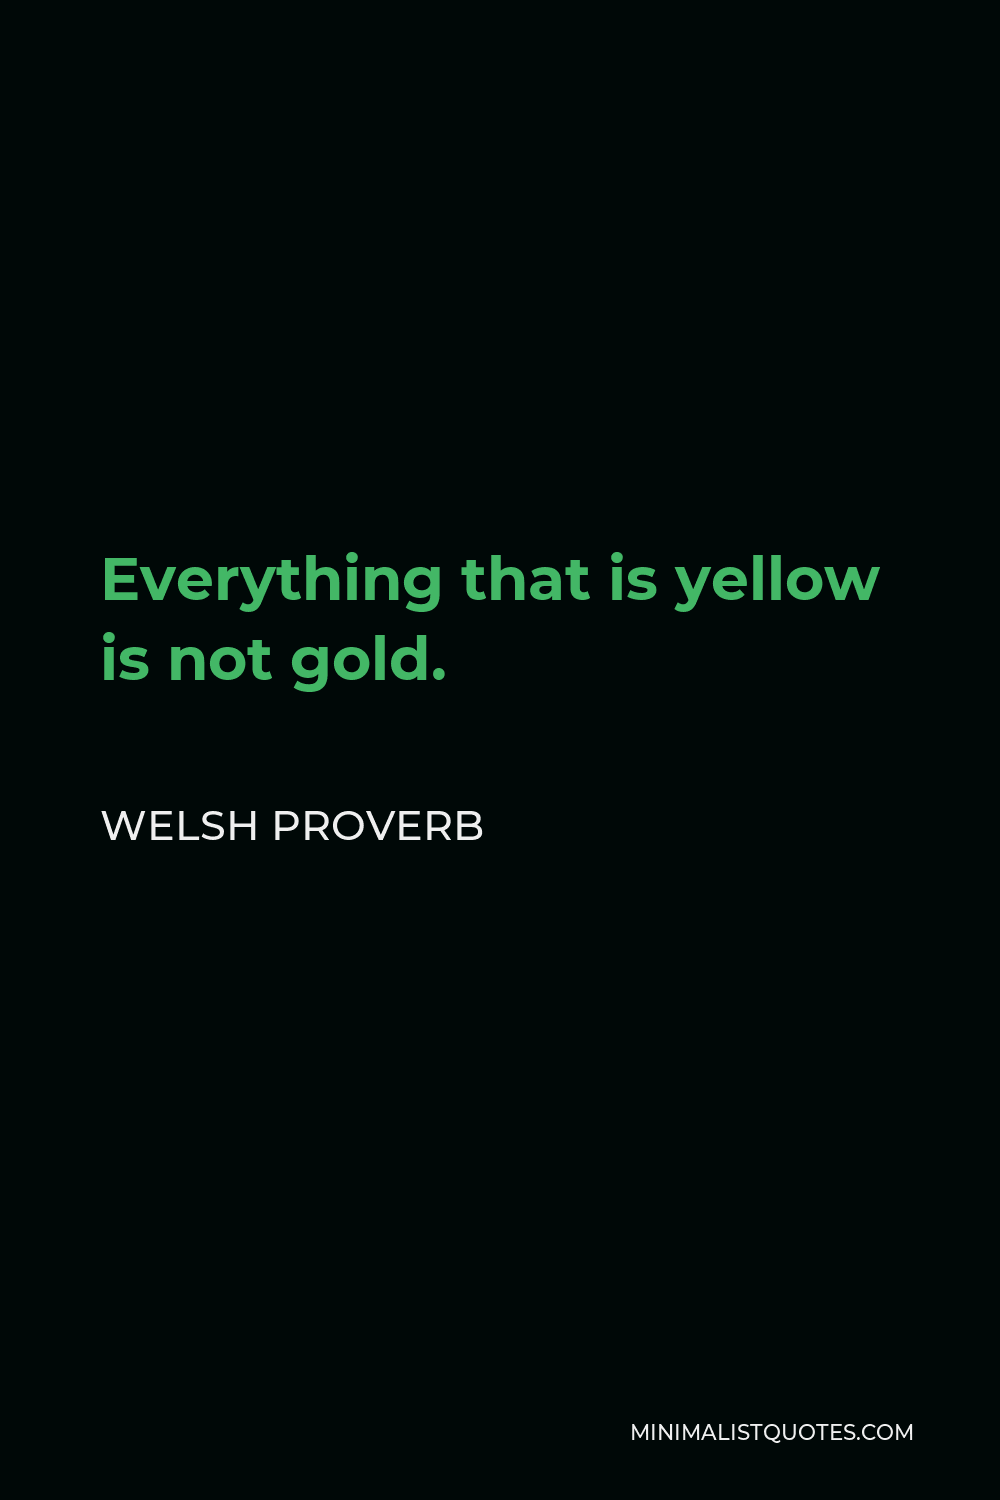 Welsh Proverb Quote - Everything that is yellow is not gold.